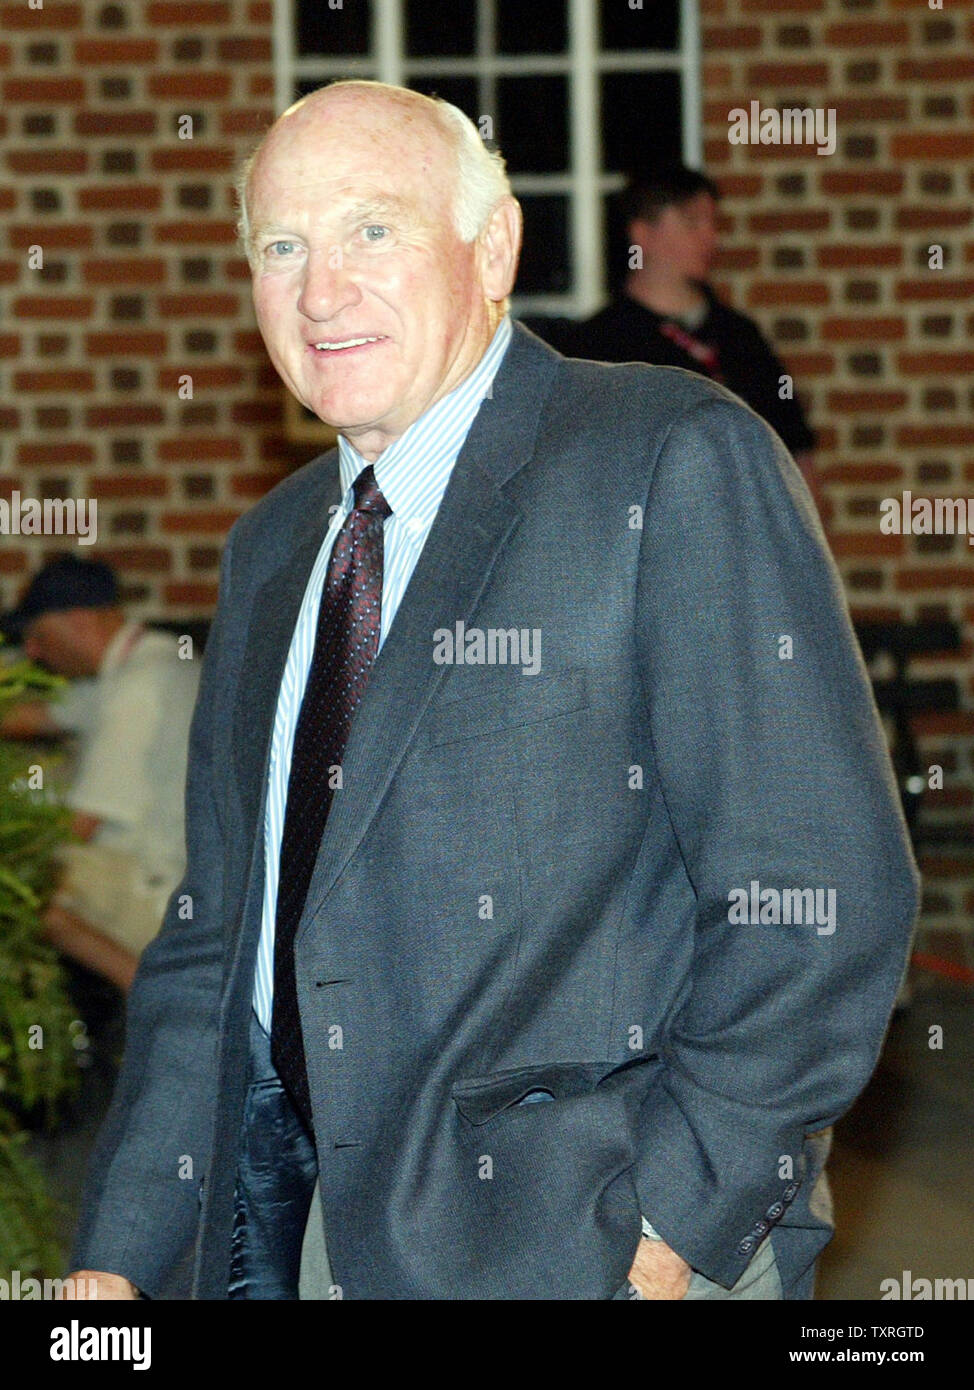 Baseball Hall of Famer Harmon Killebrew waves as he enters the National Baseball Hall of Fame and Museum for an evening reception in Cooperstown, NY on July 30, 2005. (UPI Photo/Bill Greenblatt) Stock Photo